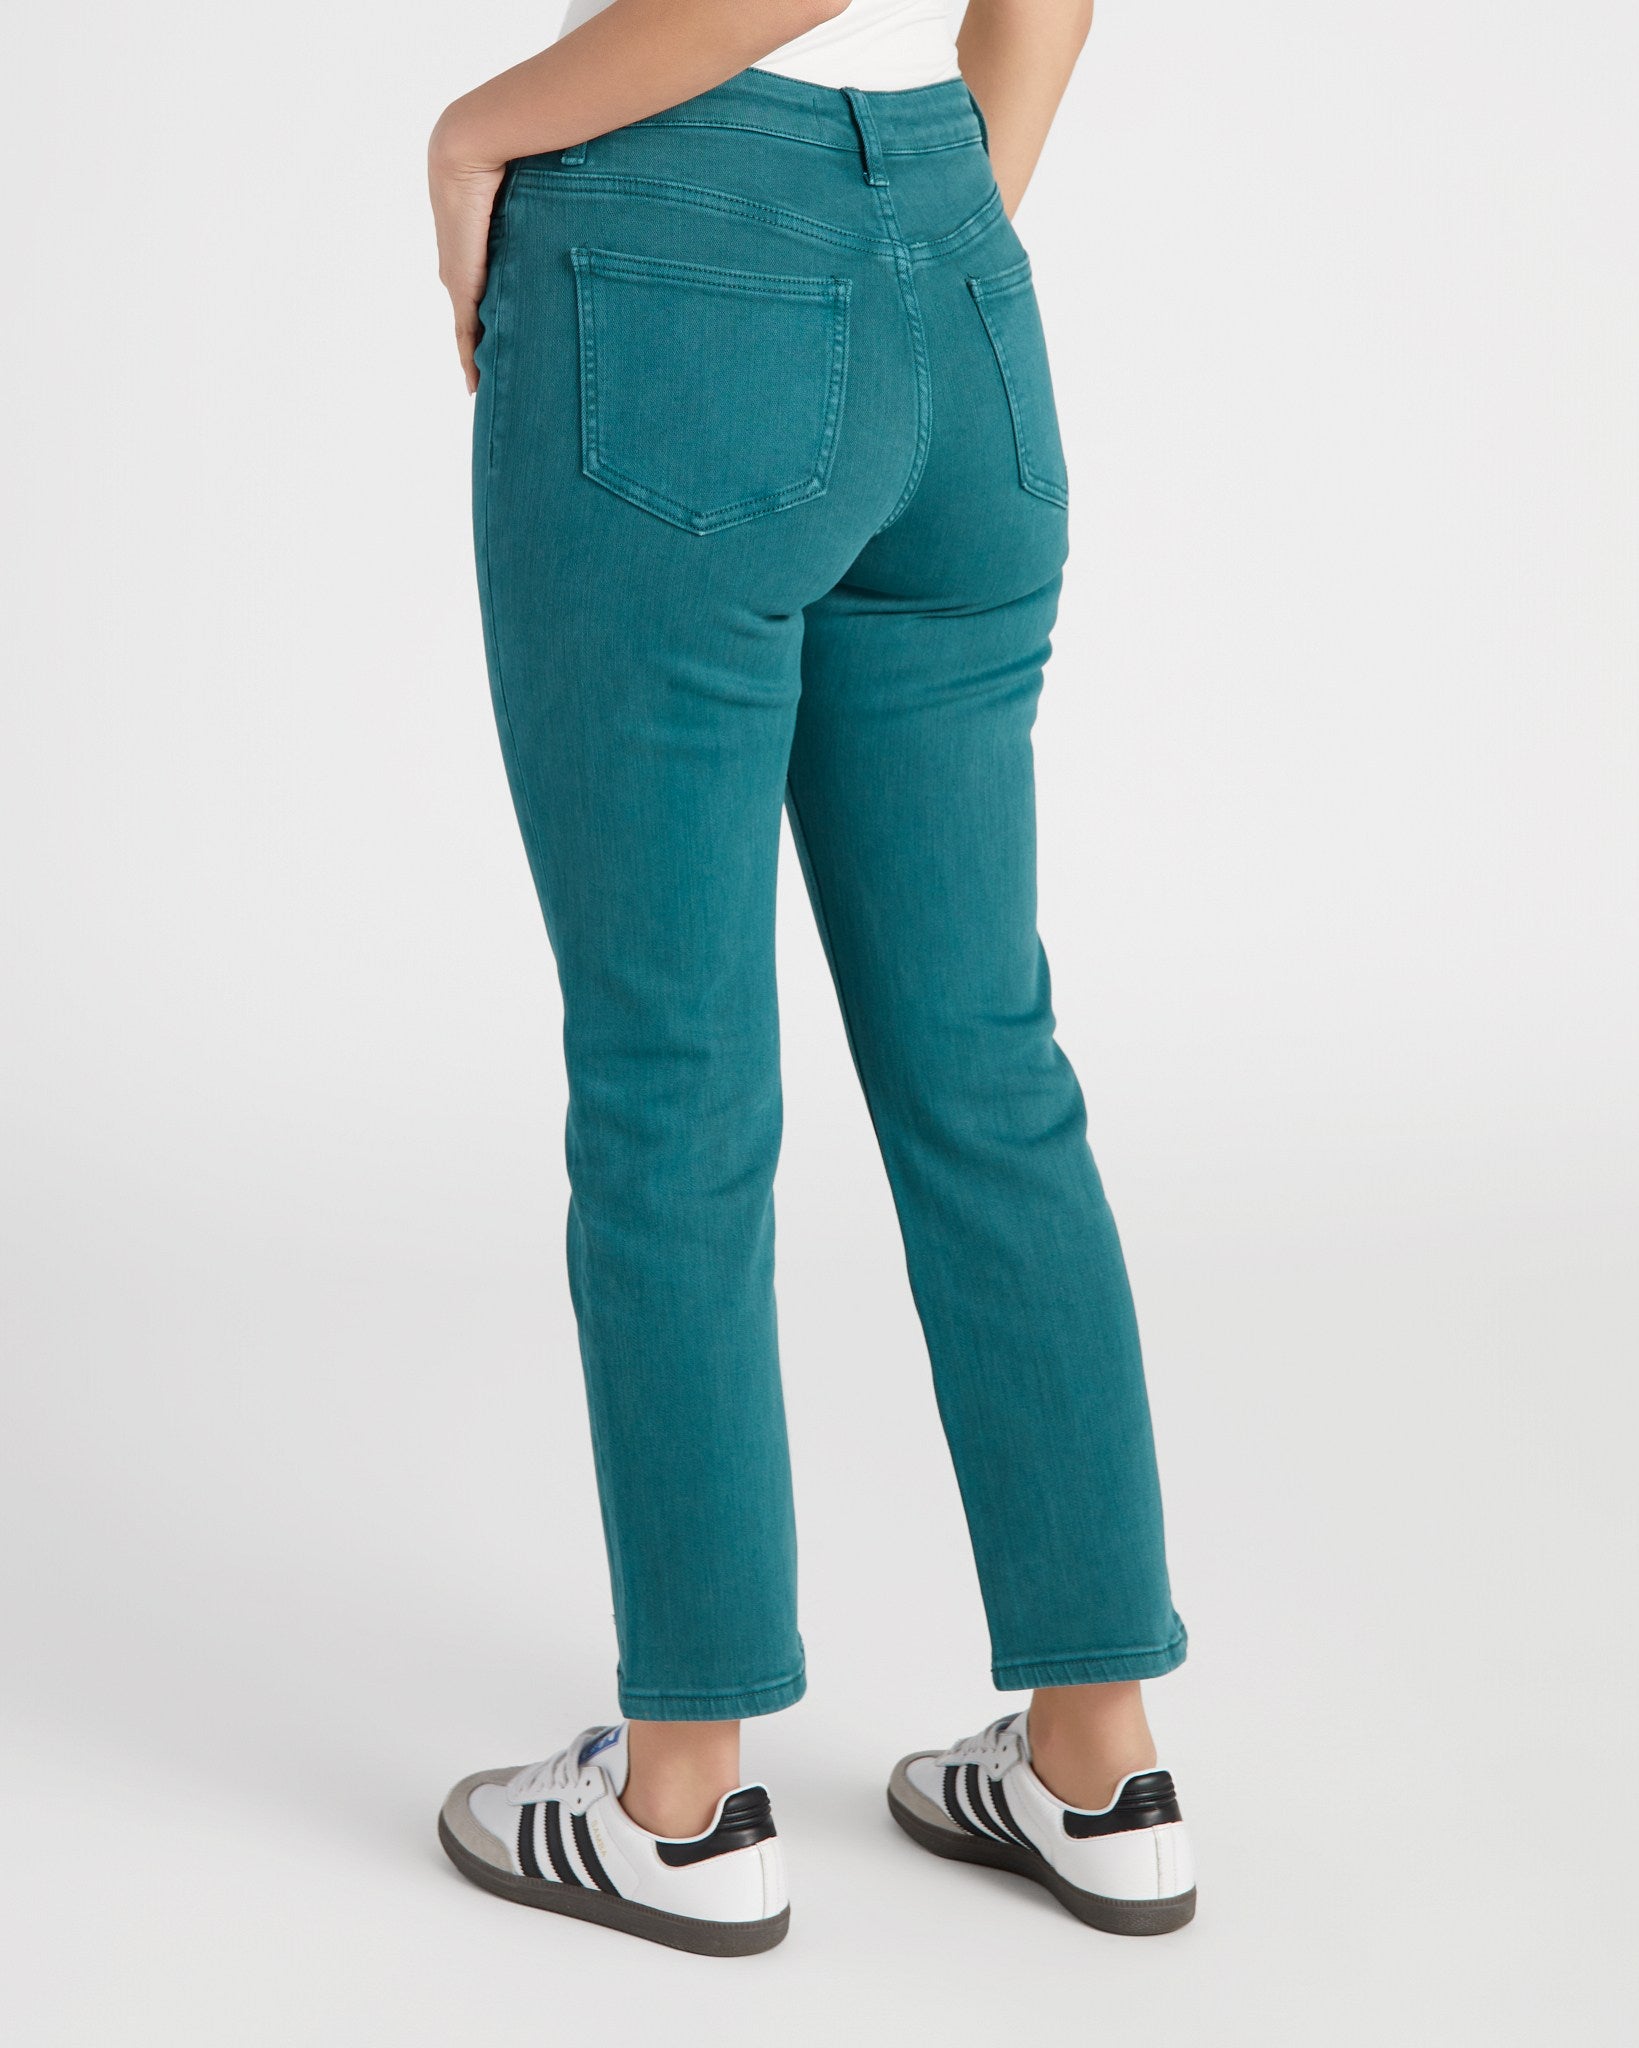 So Chic Cerulean Blue Velvet Flare Pants – From Our Farm Kids to Yours